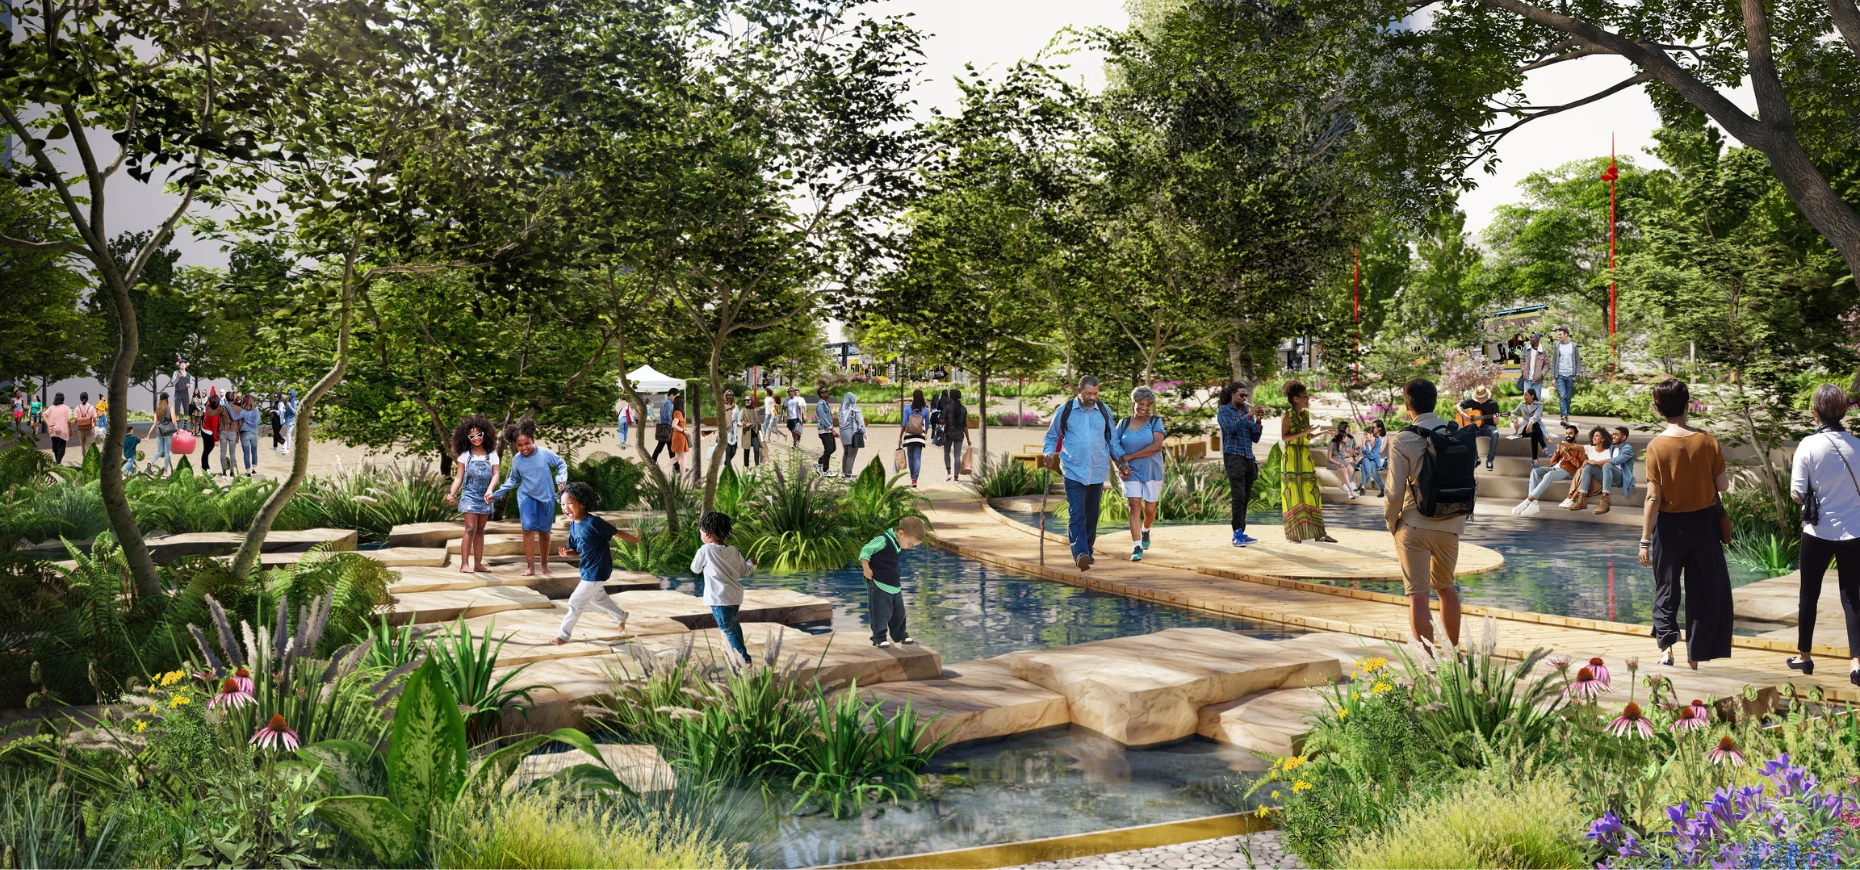 A computer-generated image of the redesigned Smithfield Birmingham water garden.